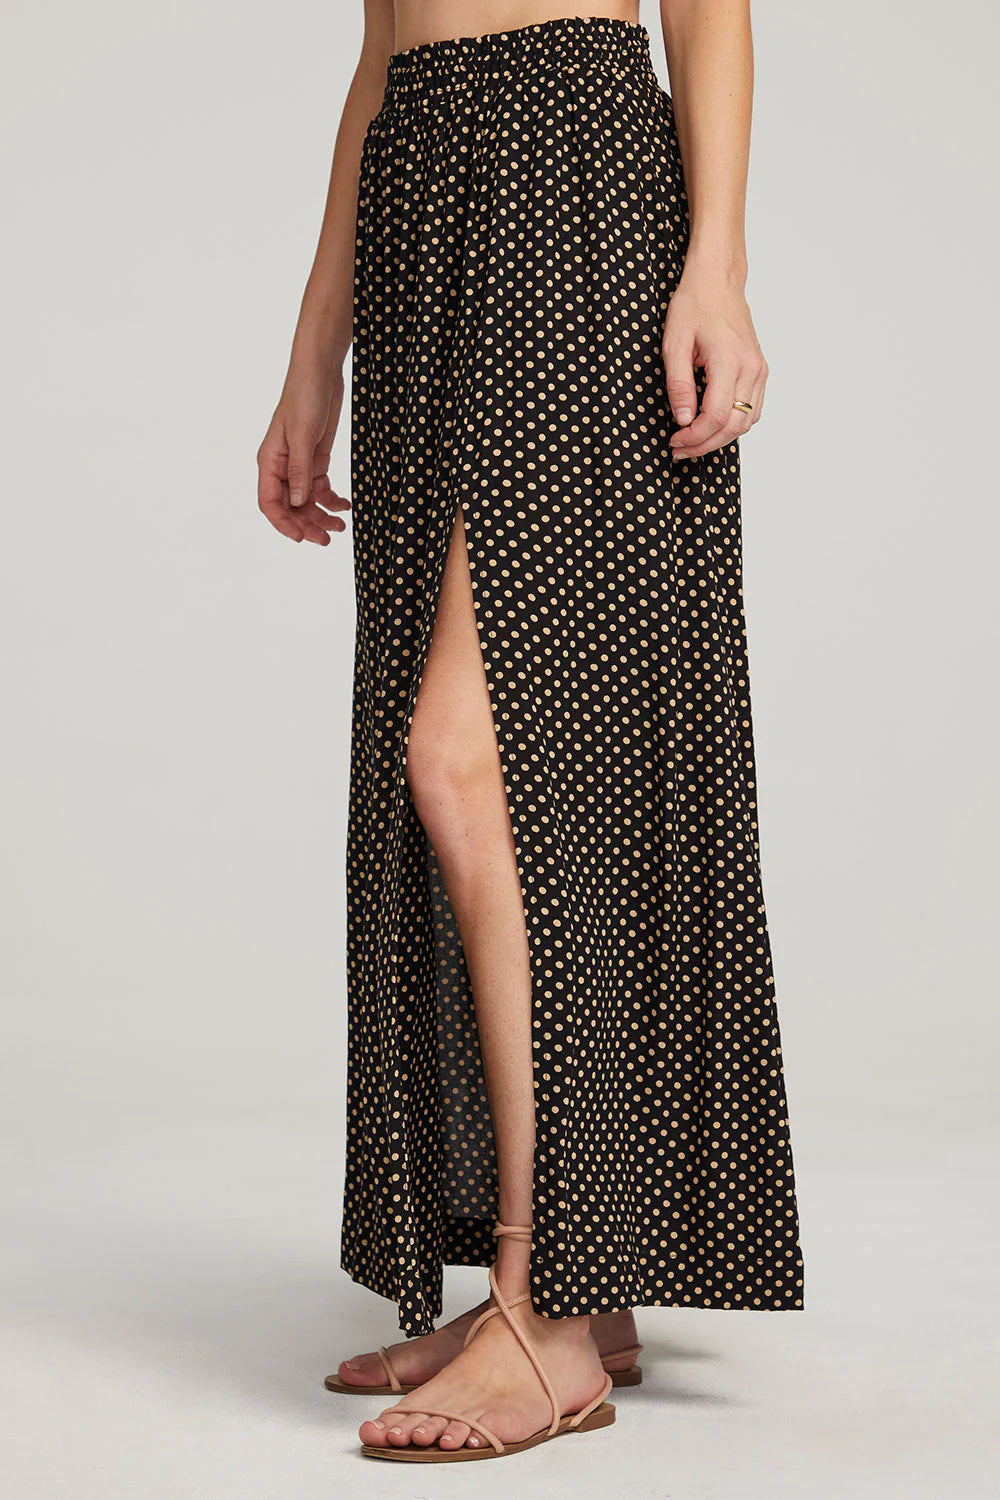 Delvie Skirt by Saltwater Luxe